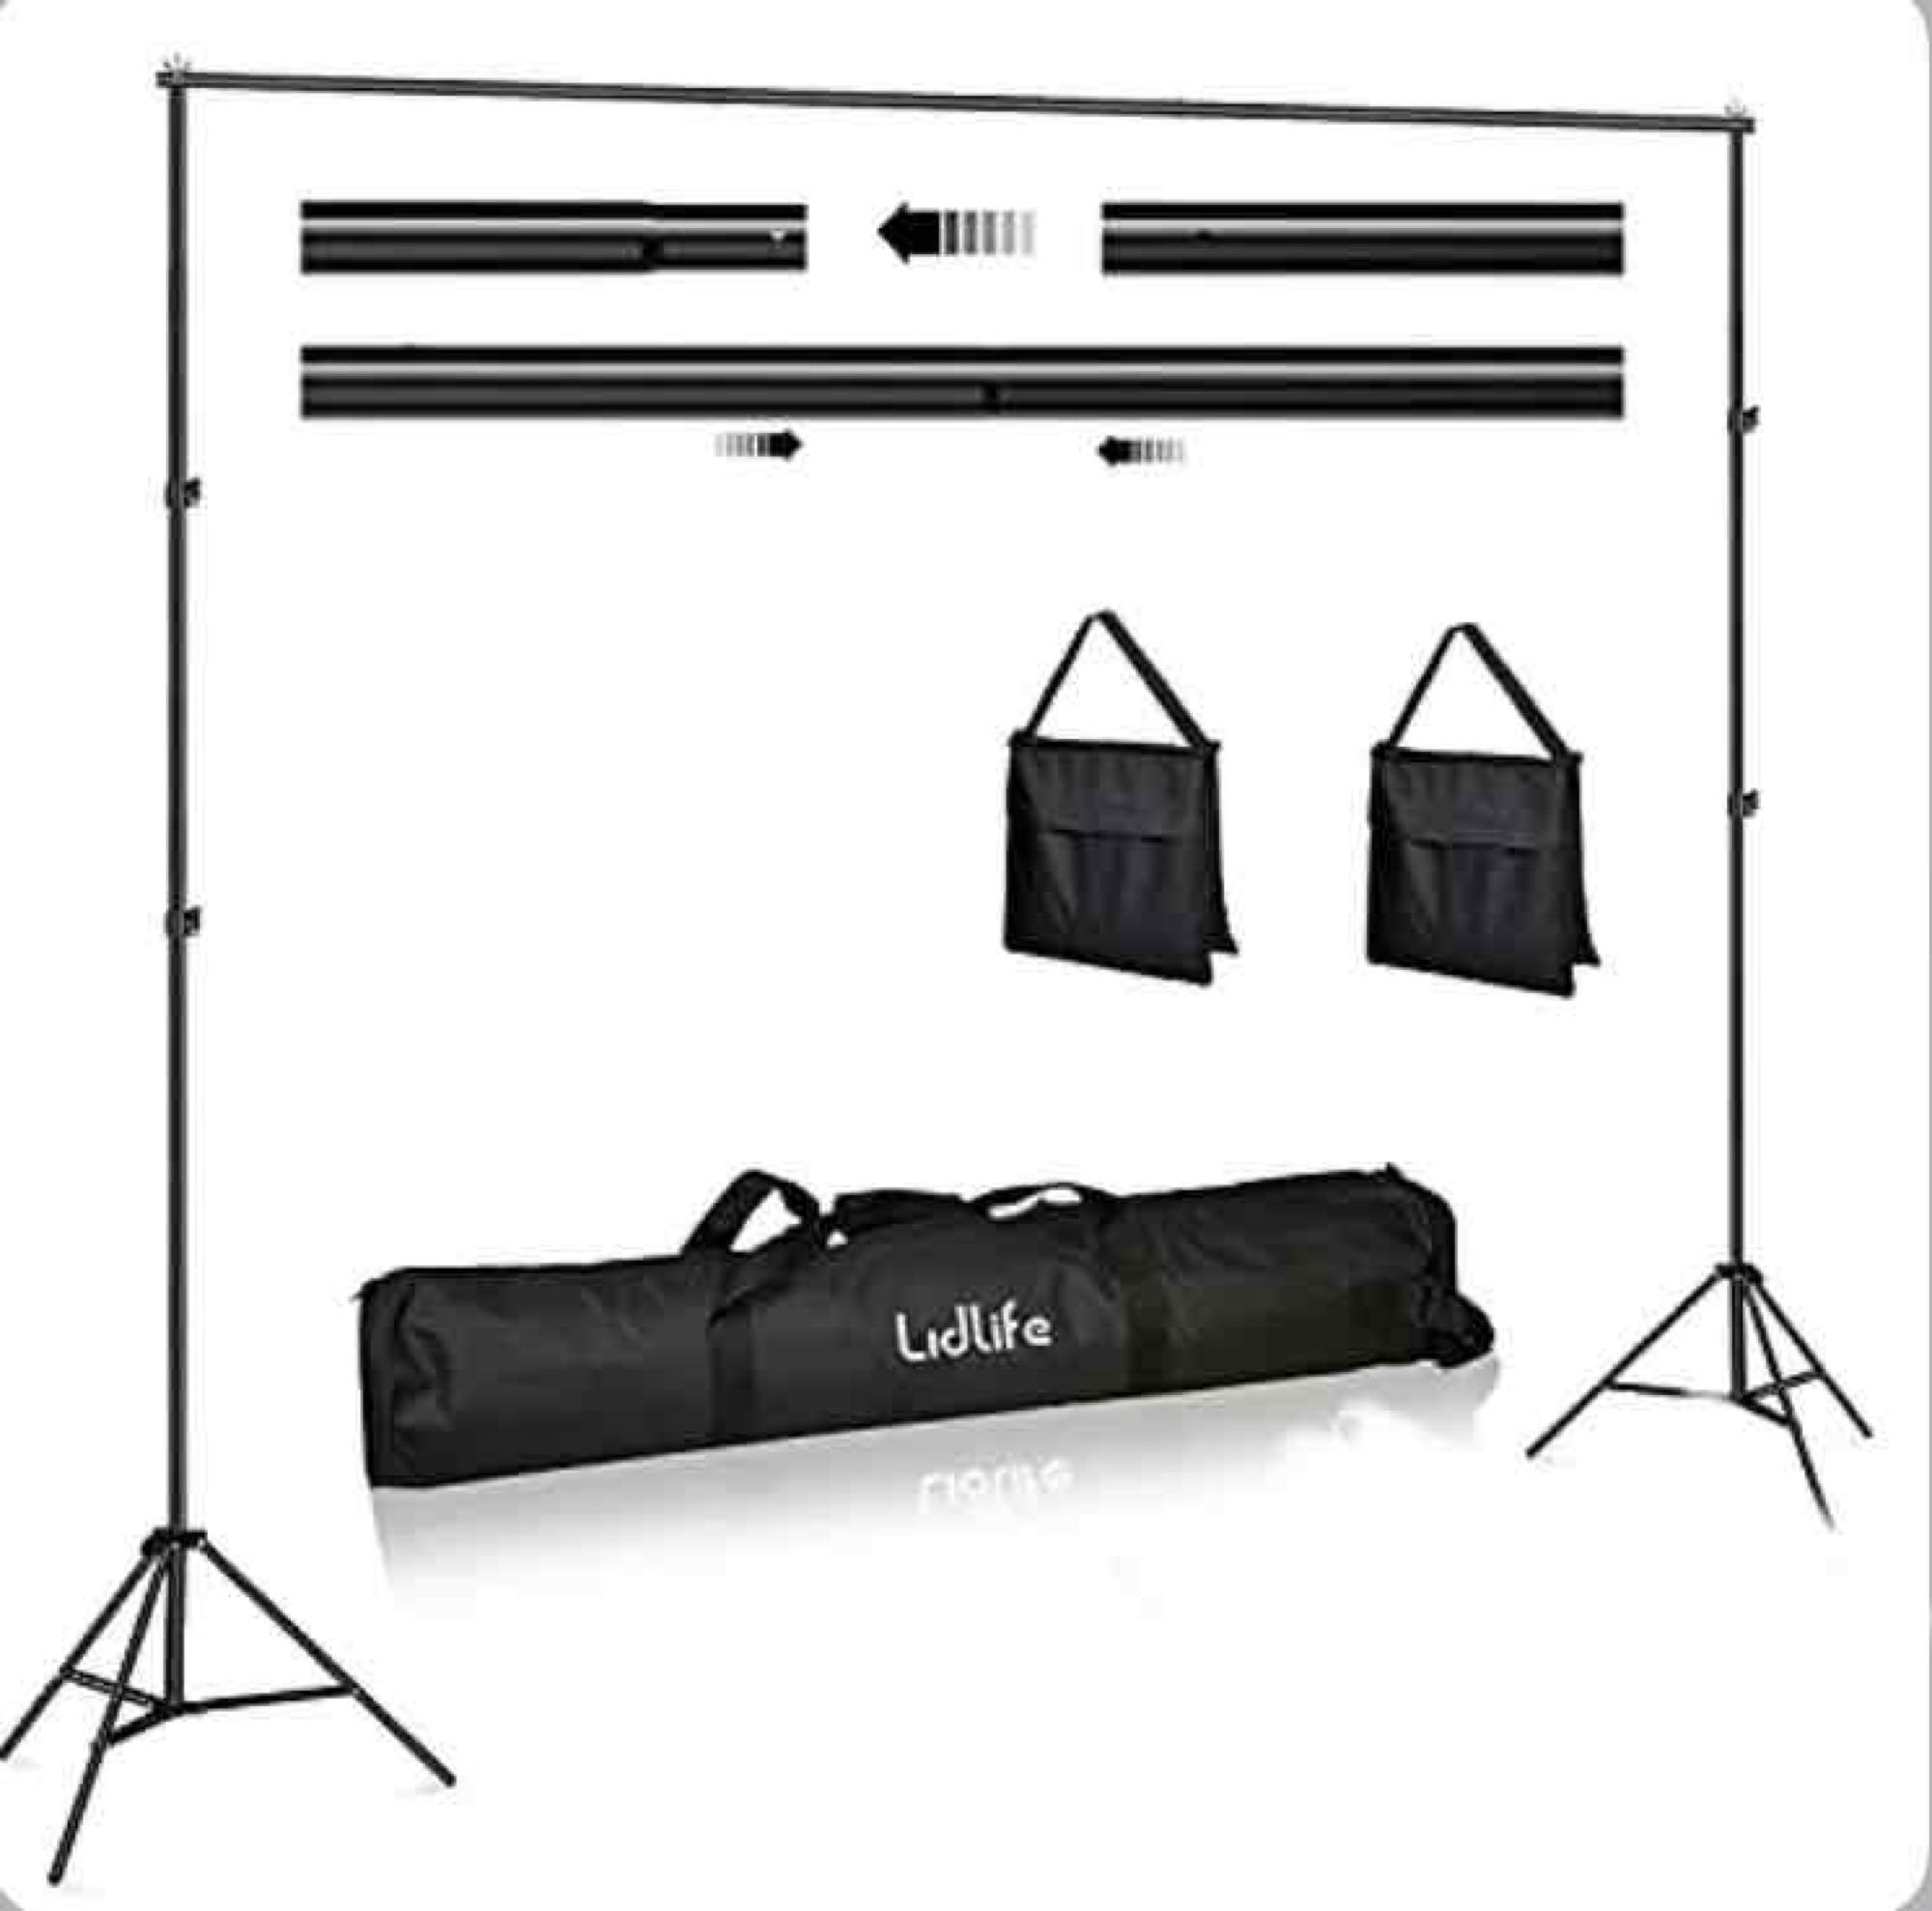 Lidlife Backdrop Stand 6.5 x 10ft